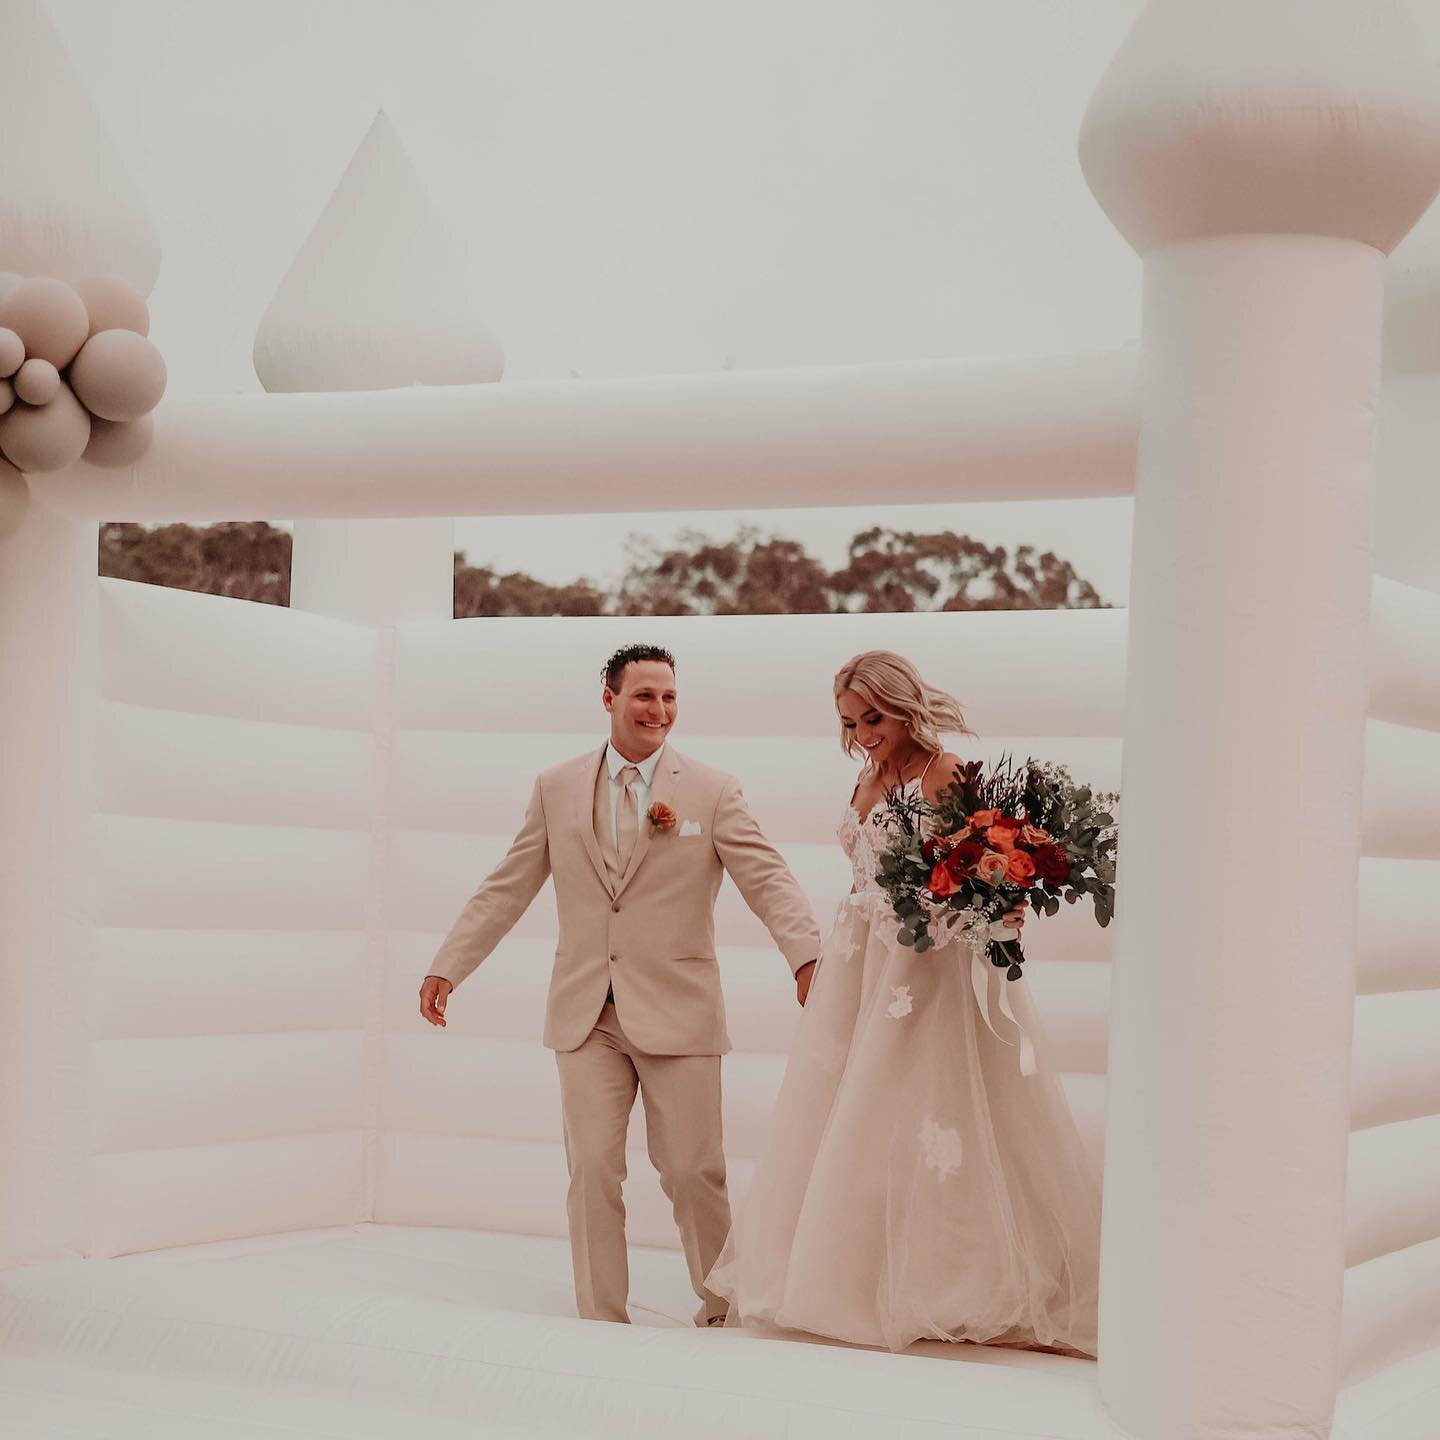 In case you needed some more convincing&hellip; these white bounce houses were MADE for weddings 🤩🤩
.
.
#inflatenorthal #smallbusinessal #northalabama #alabamaweddings#bouncehouse #whitebouncehouse #modernbouncehouse #huntsvilleal #madisonal #hunts